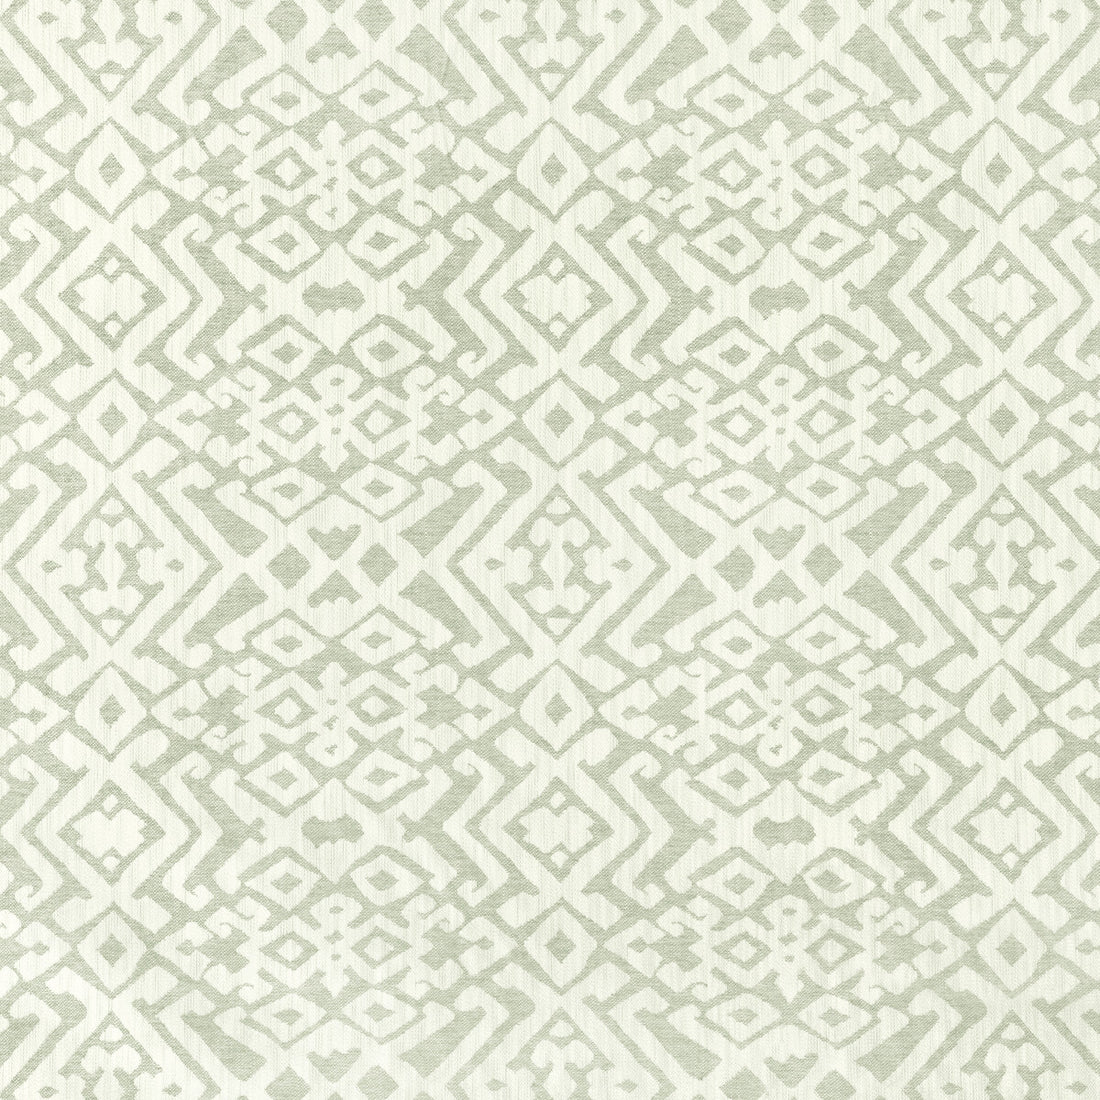 Springbok fabric in sage color - pattern 36874.130.0 - by Kravet Couture in the Atelier Weaves collection